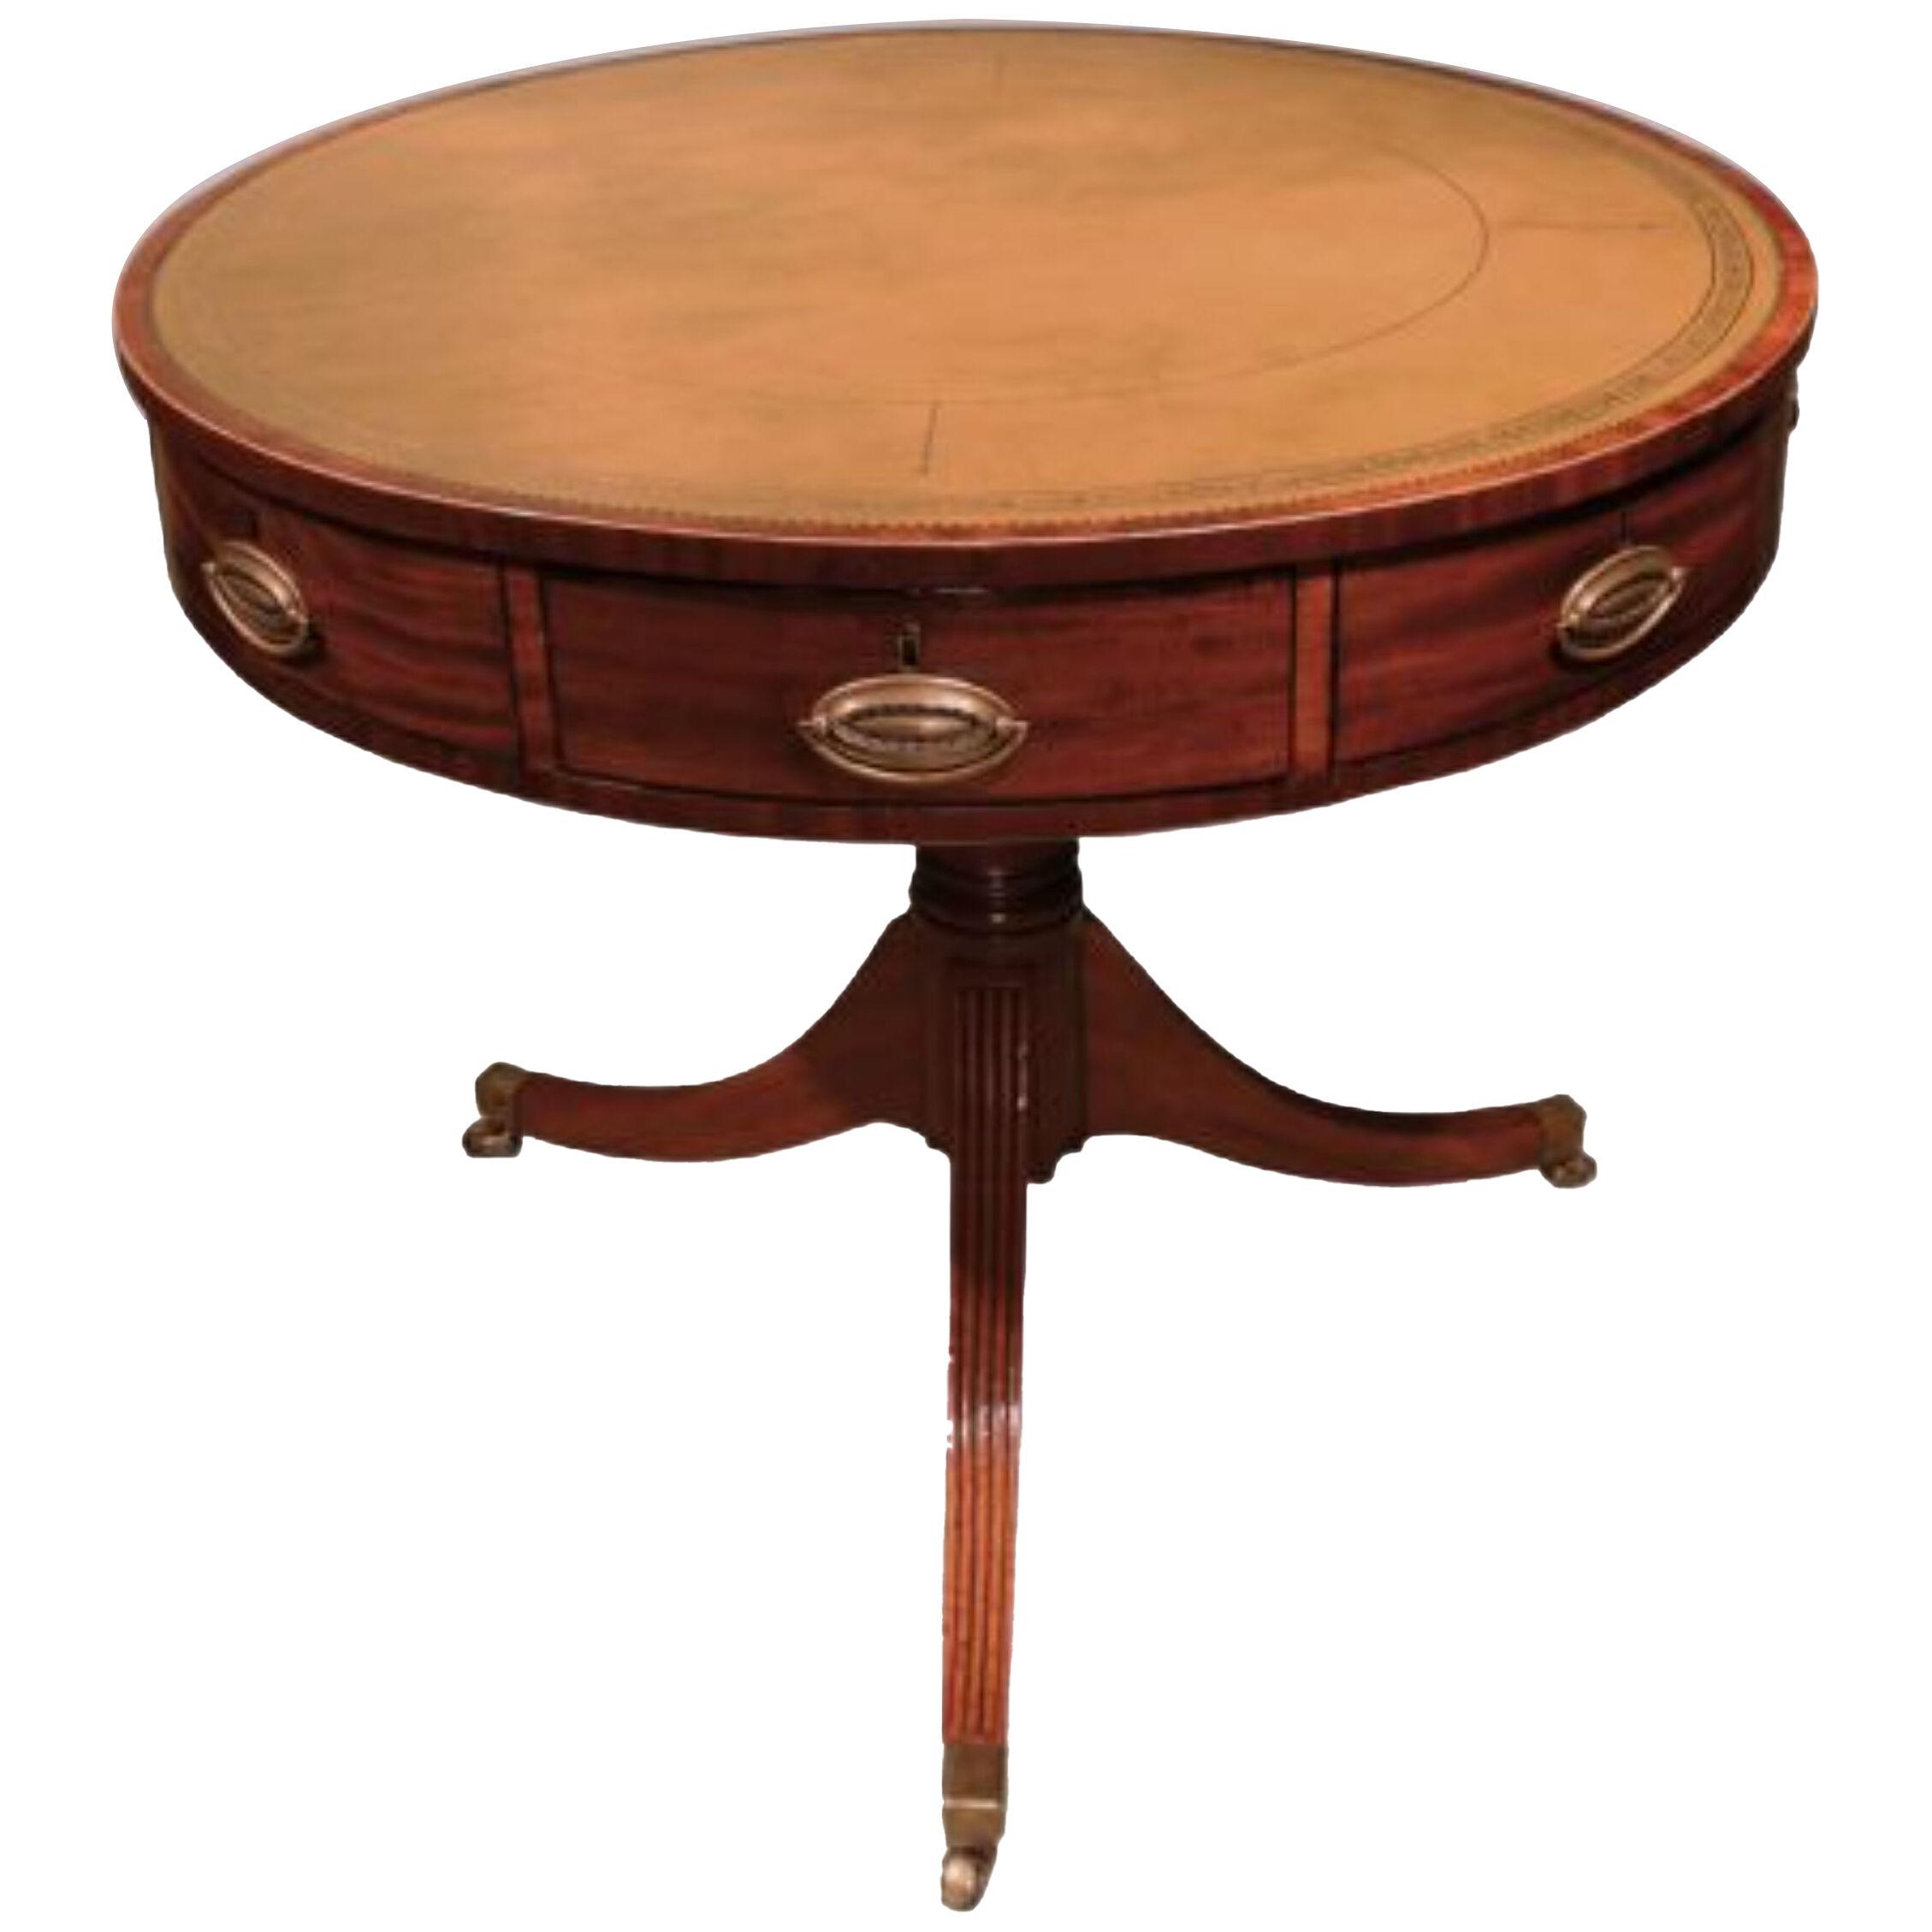 A George III period Small Mahogany Drum Table